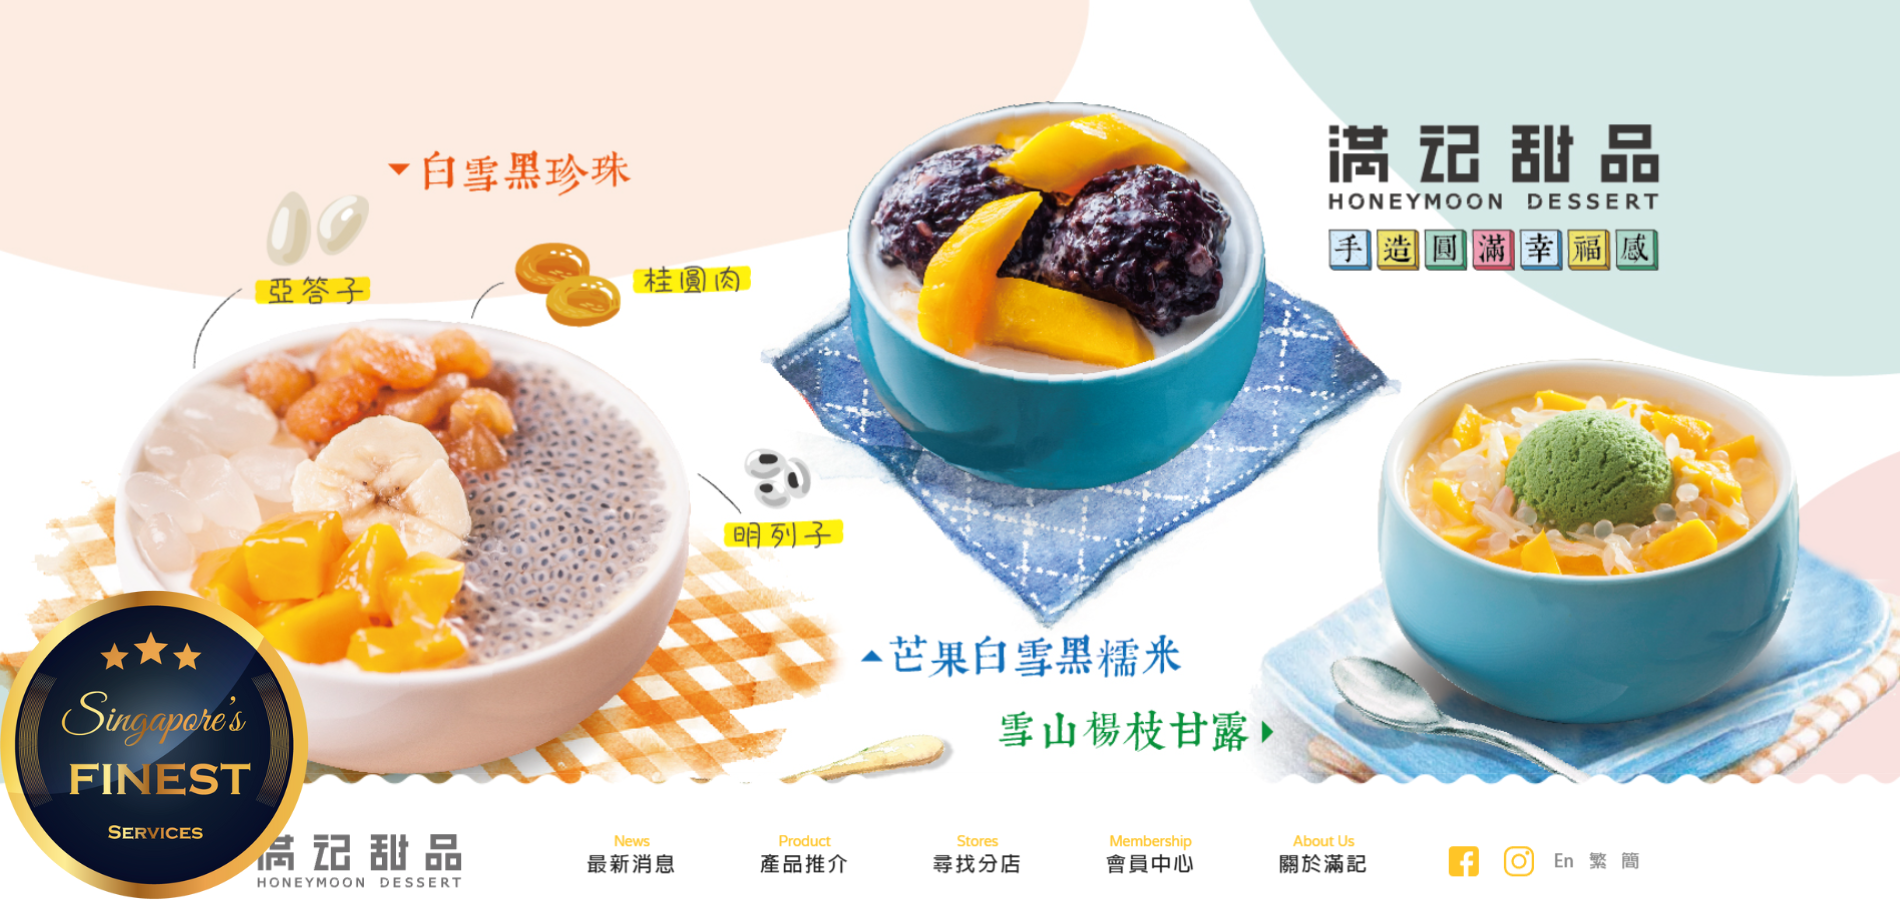 The Finest Chinese Dessert Places in Singapore